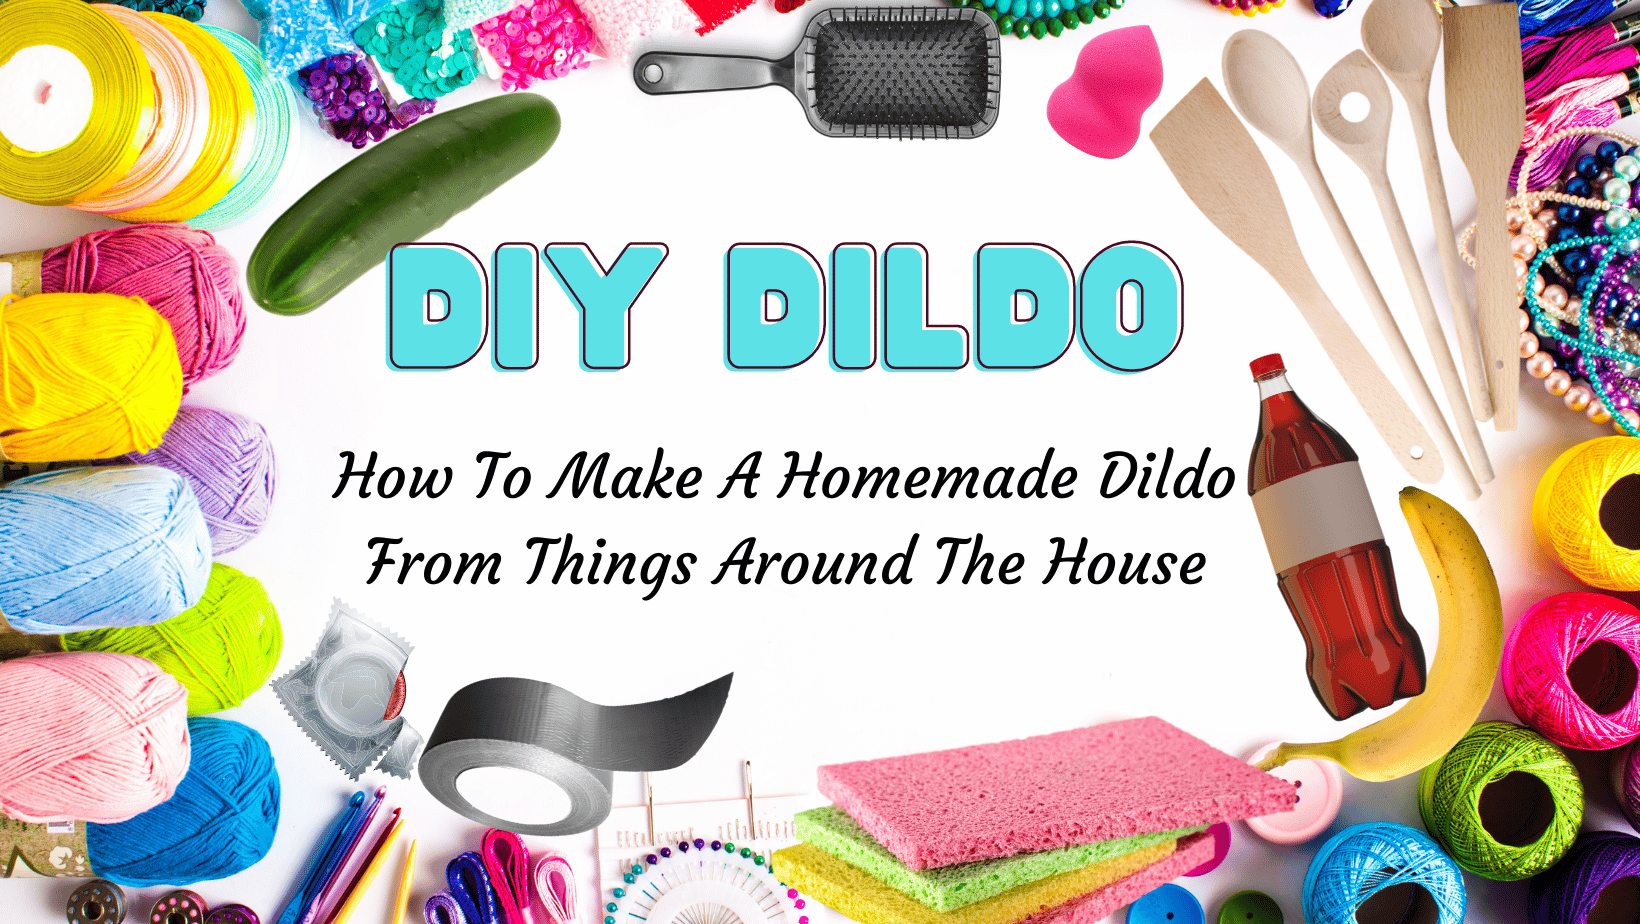 bruce shelley recommends household items used as dildo pic